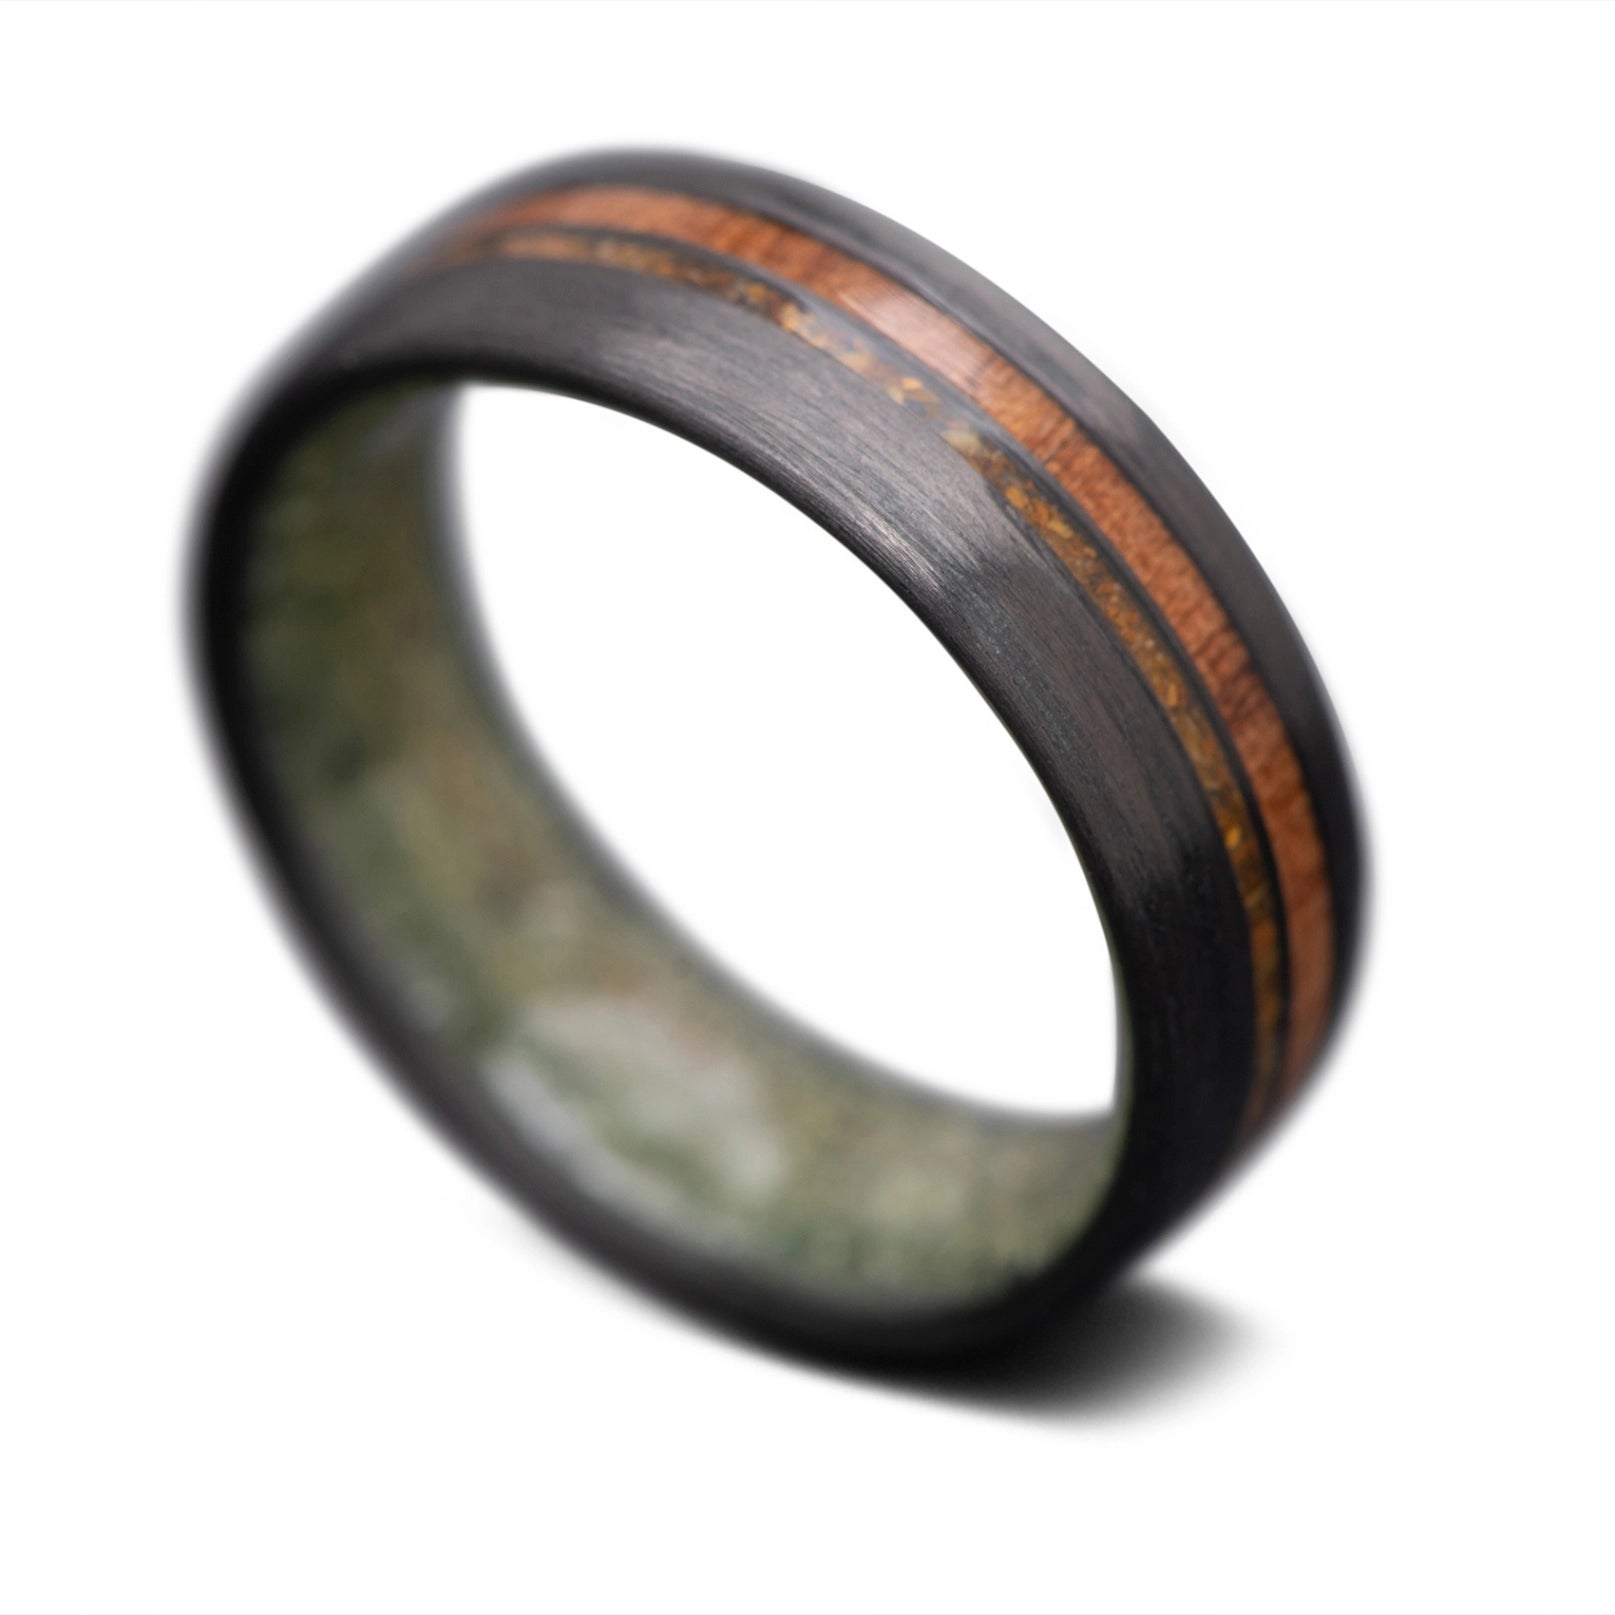 CarbonUni Core ring with Tiger Eye, Walnut Inlay and Jade inner sleeve, 7mm - THE INNOVATOR